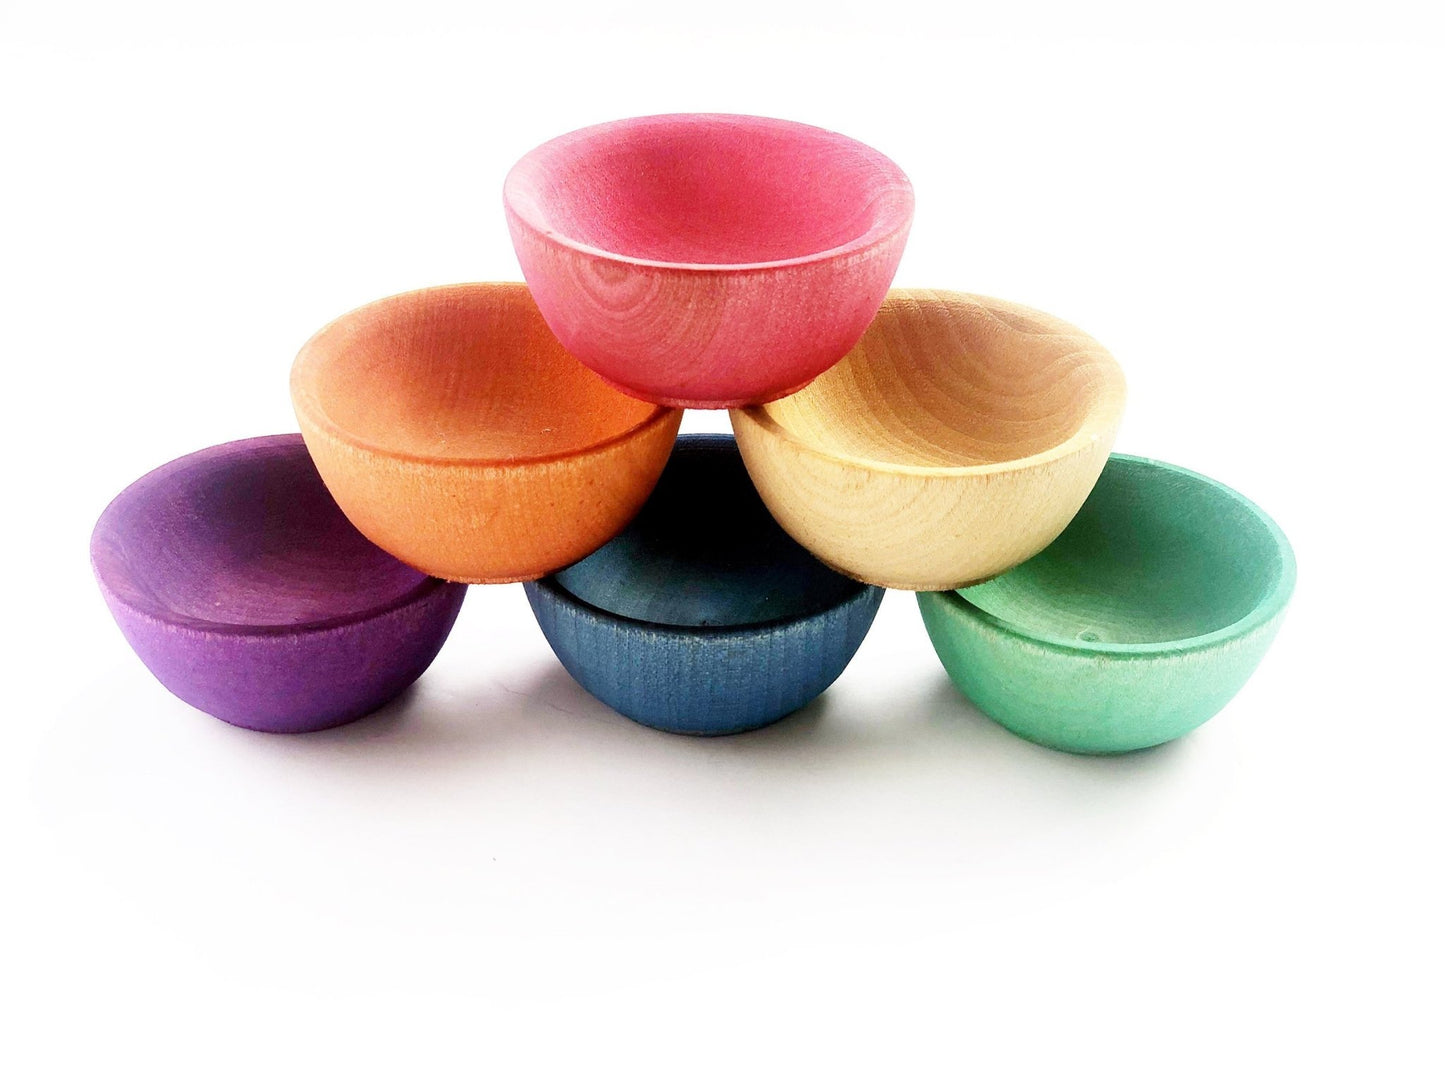 Rainbow Montessori Sorting Bowls by Legacy Learning Academy - Wood Wood Toys Canada's Favourite Montessori Toy Store